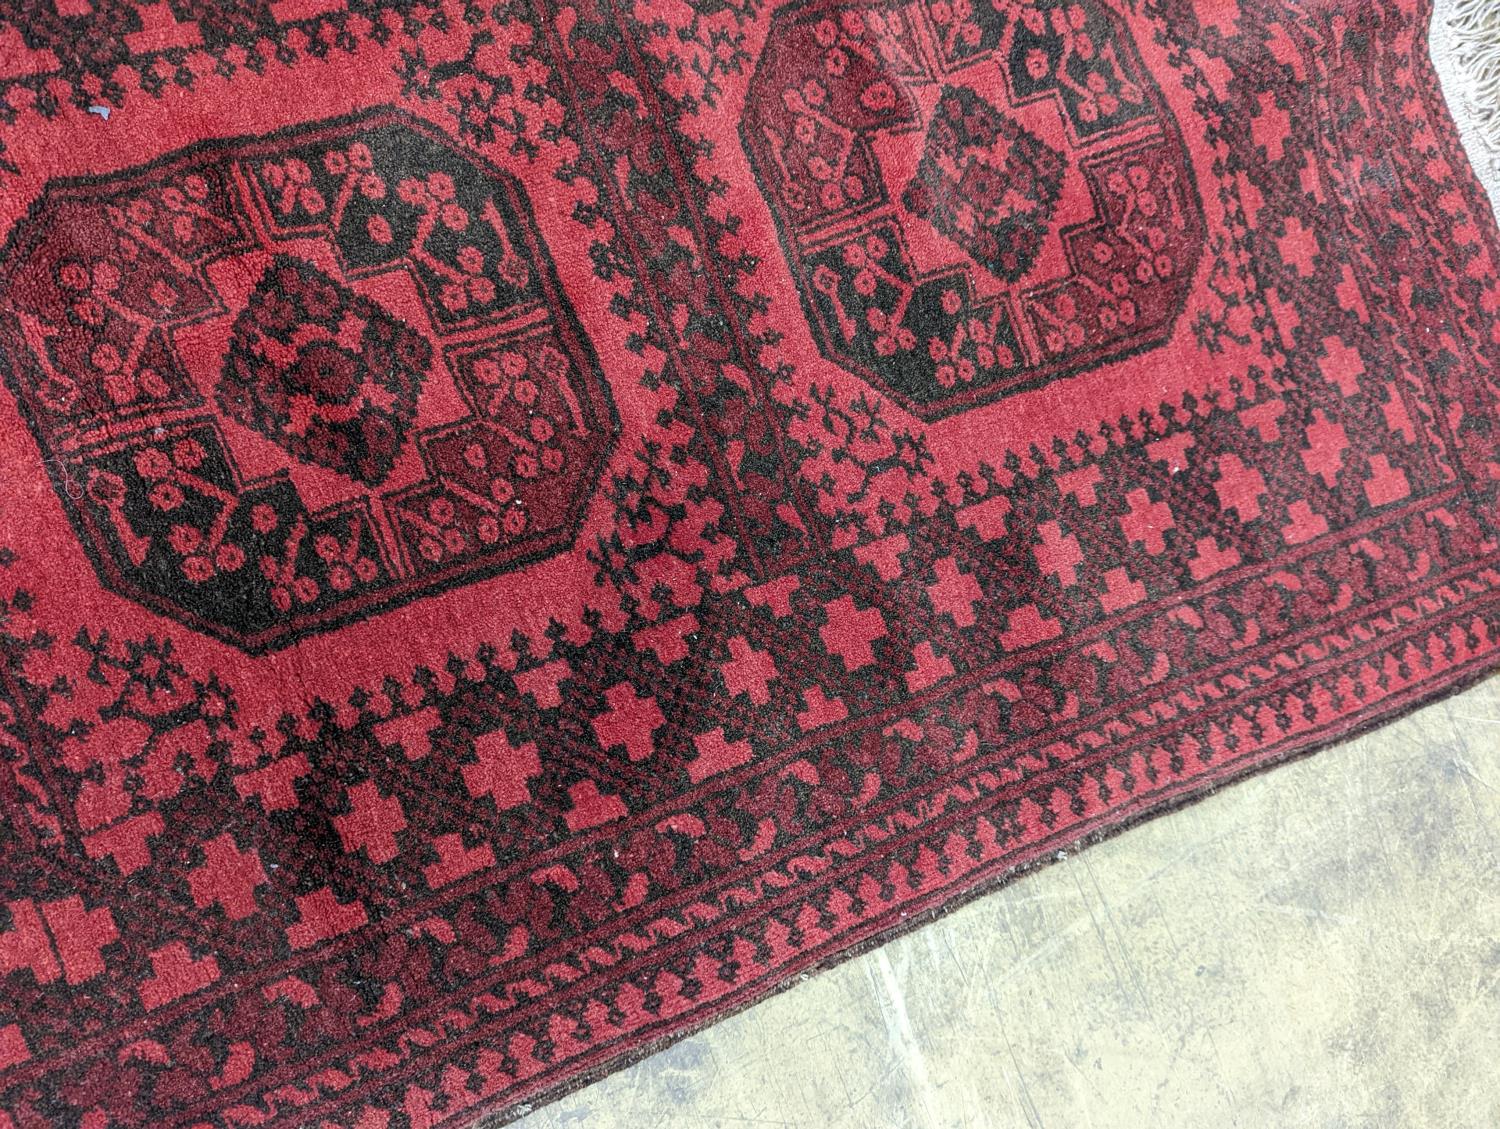 An Afghan red ground rug, 140 x 96cm - Image 4 of 4